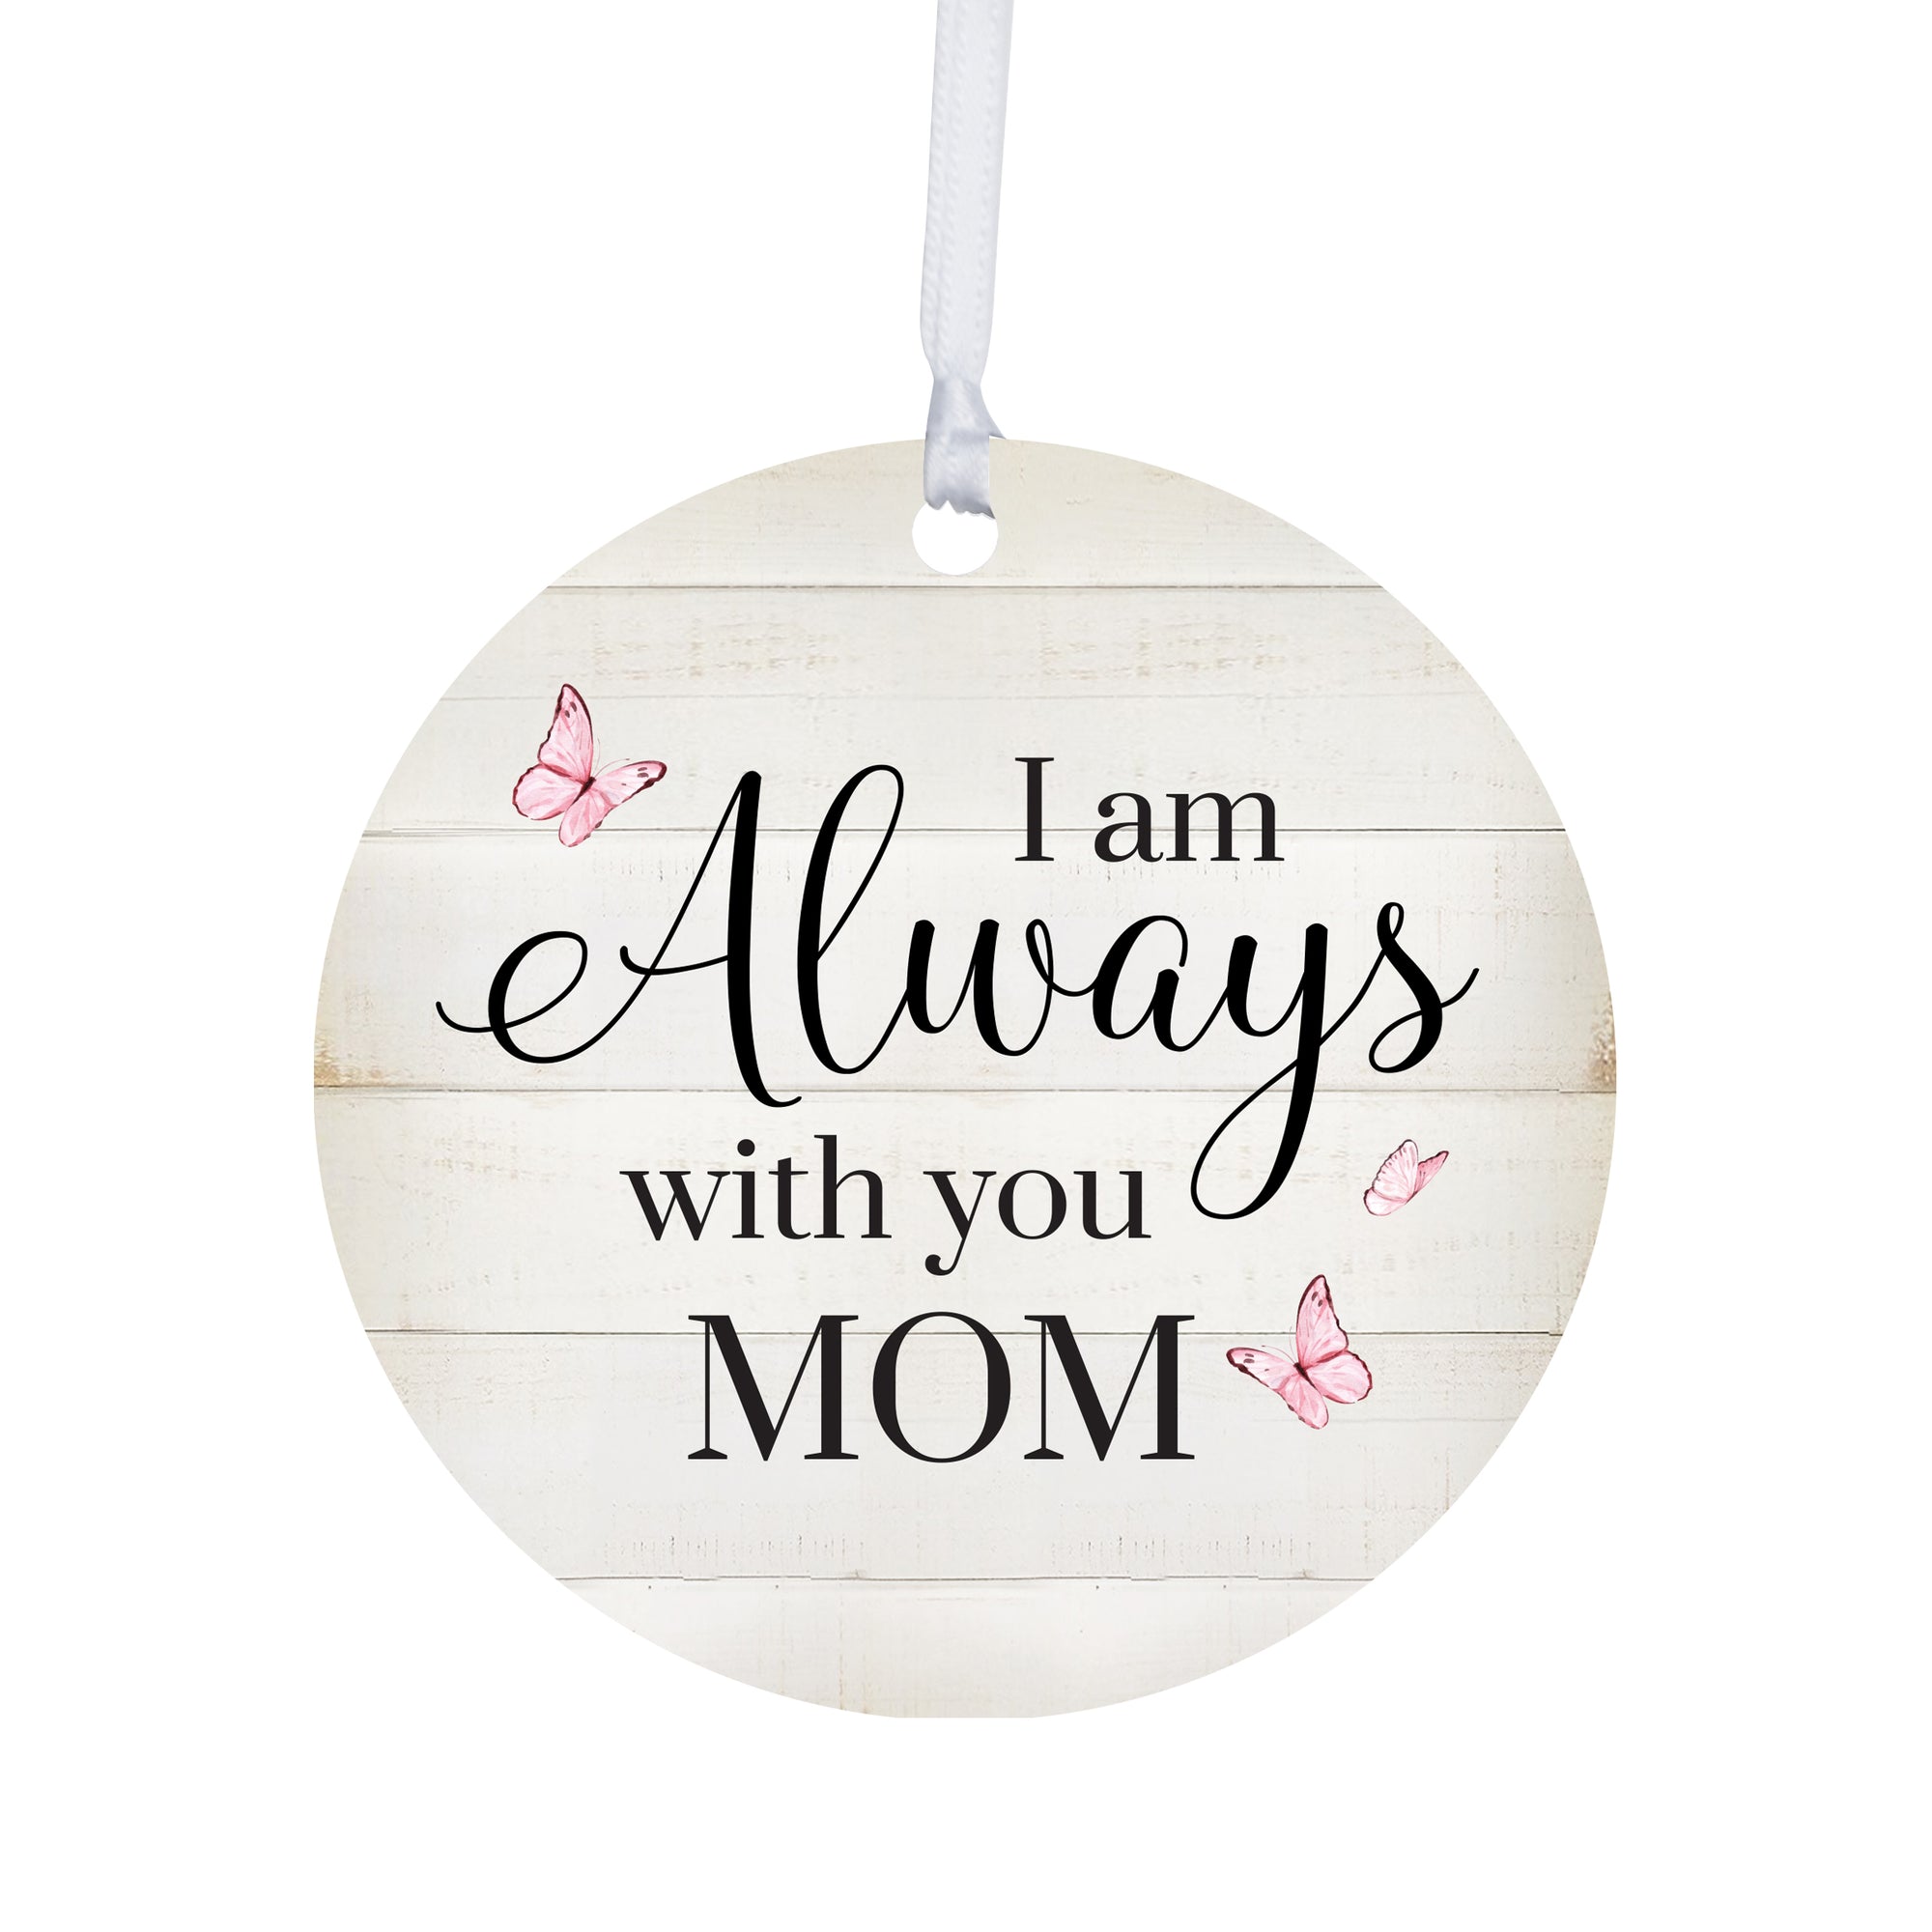 Memorial Ornament gifts for loss of loved ones